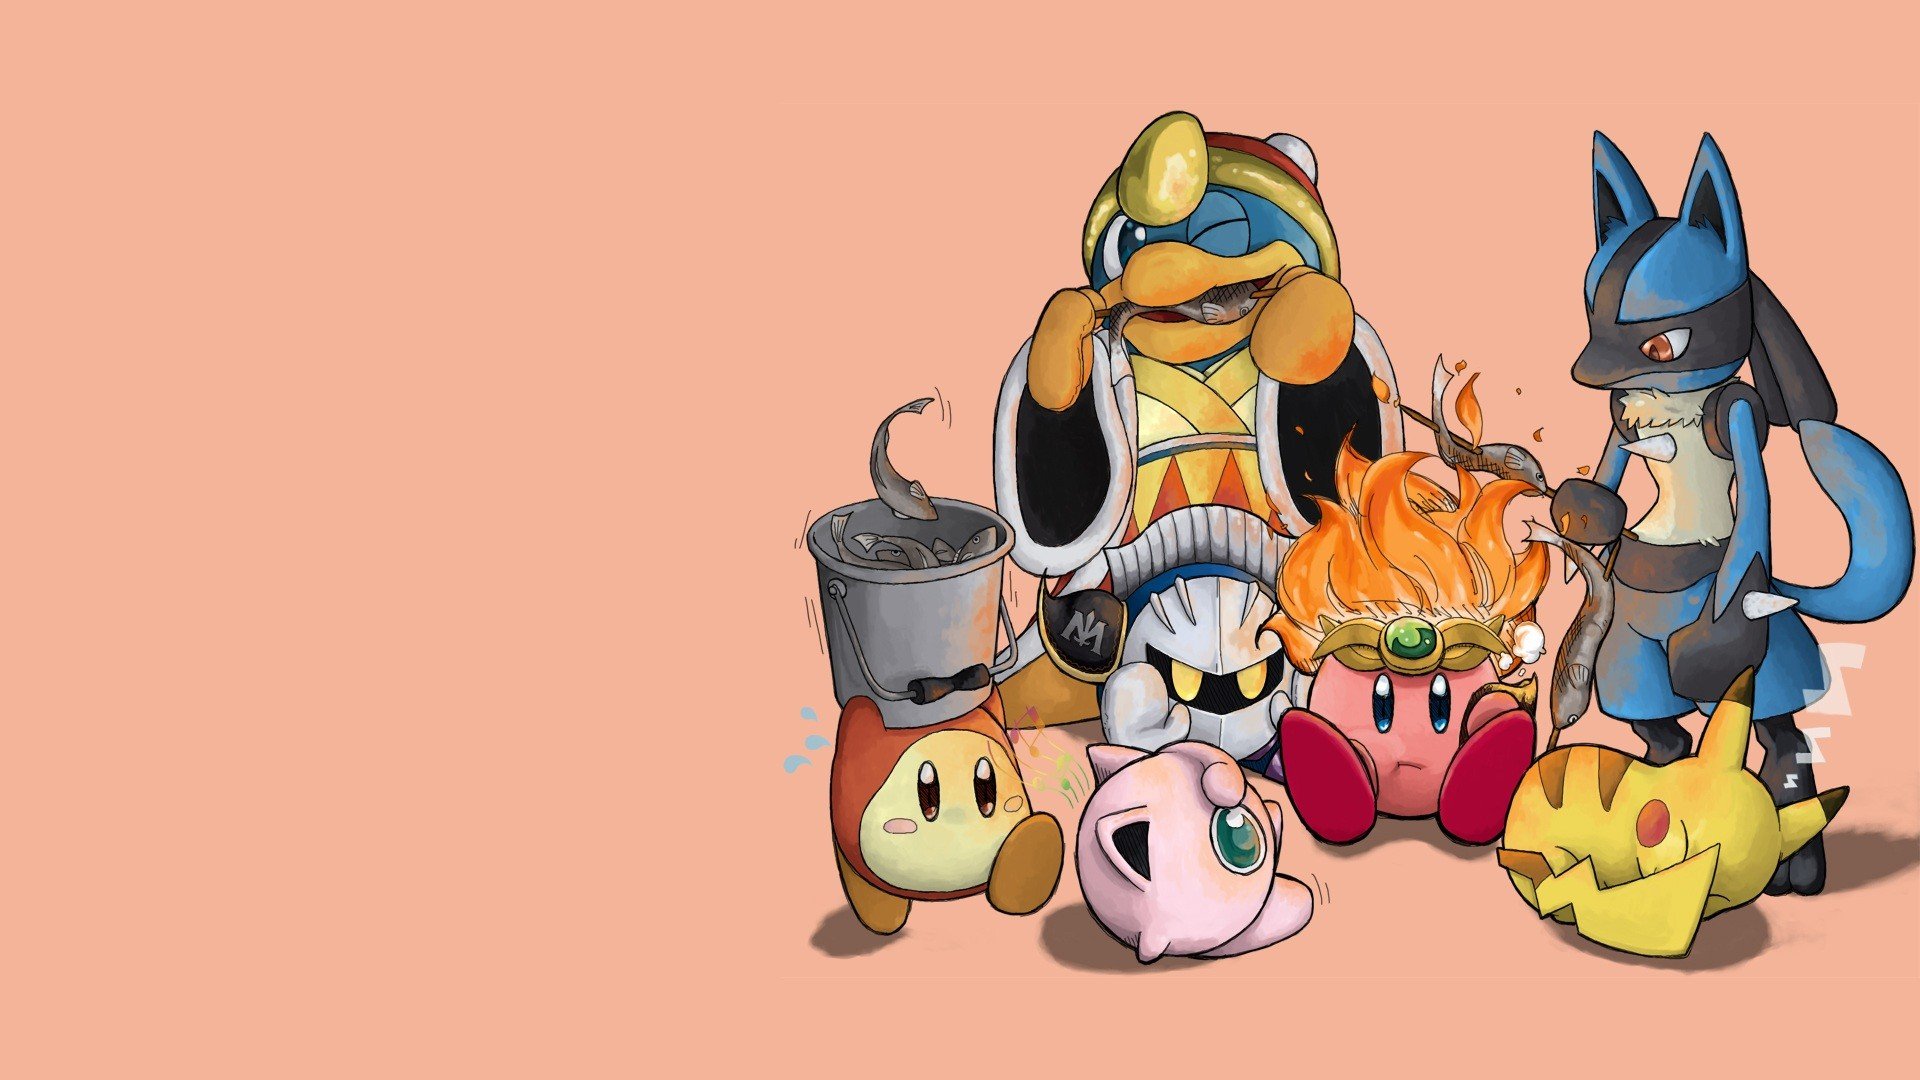 kirby, Pokemon, Video, Games, Pikachu, King, Dedede, Camping, Simple, Background, Lucario, Jigglypuff, Metaknight, Super, Smash, Brothers, Waddle, Dee Wallpaper